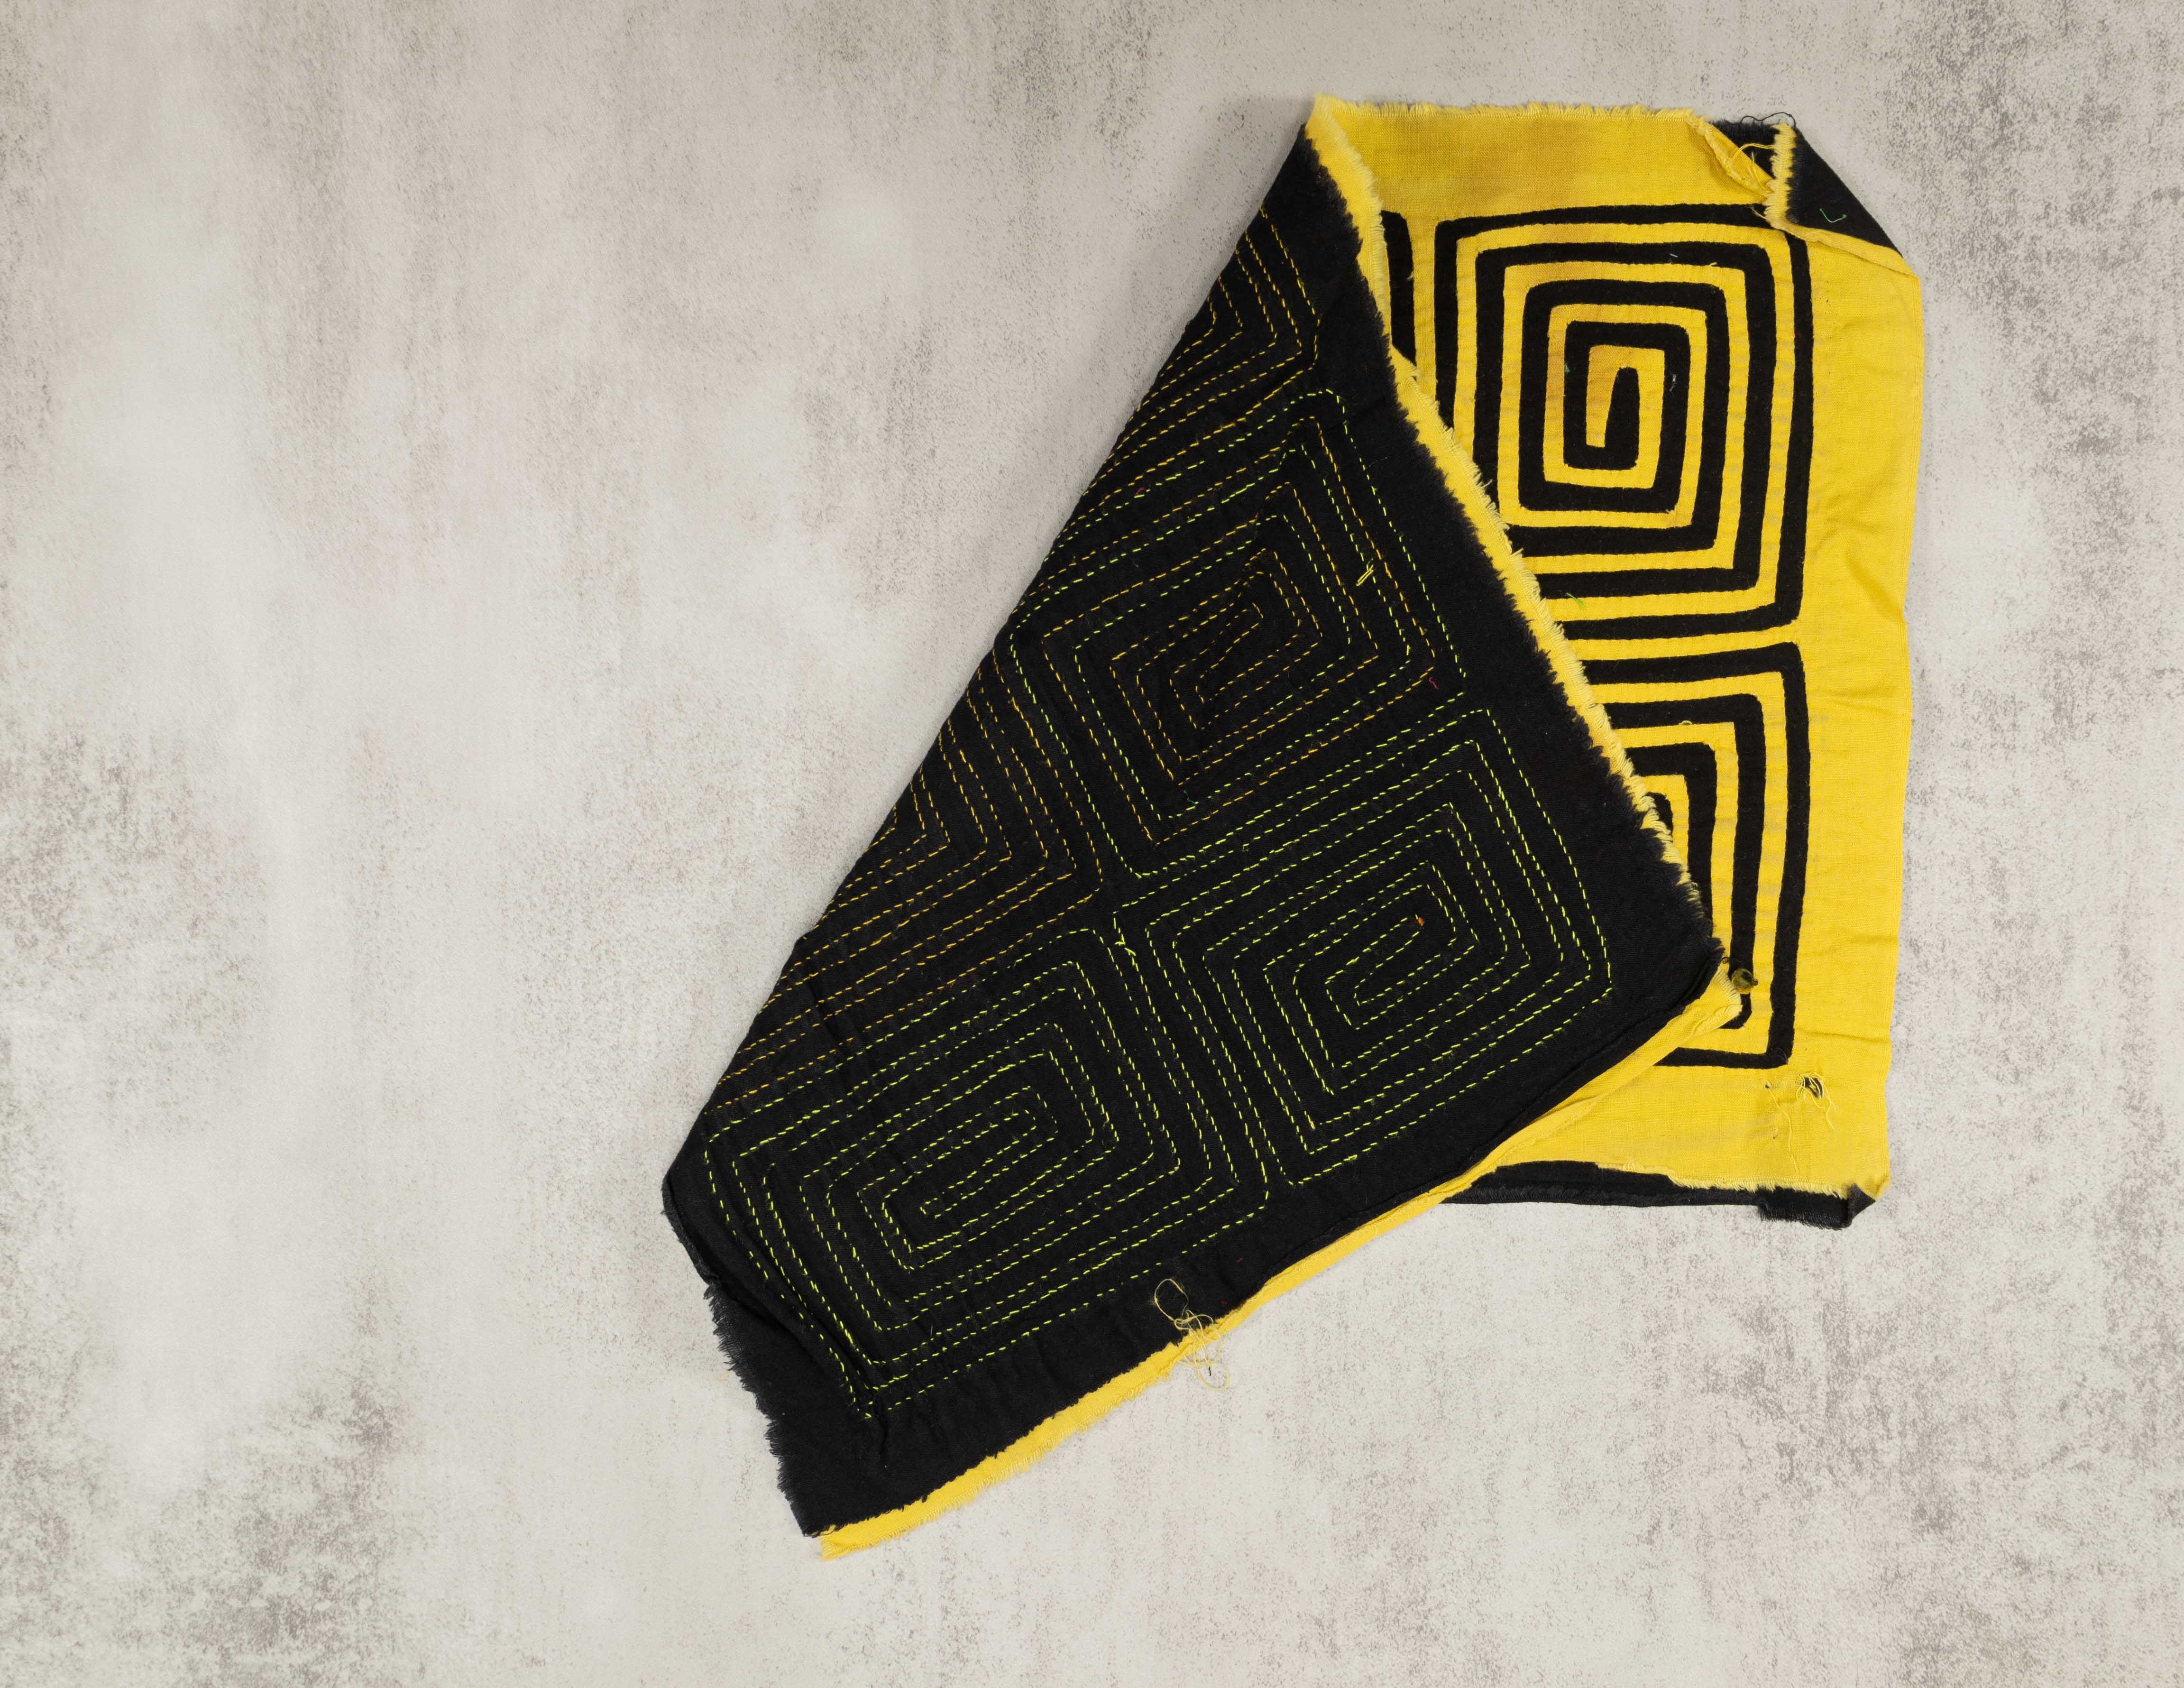 Vintage Yellow And Black Classic Design Mola